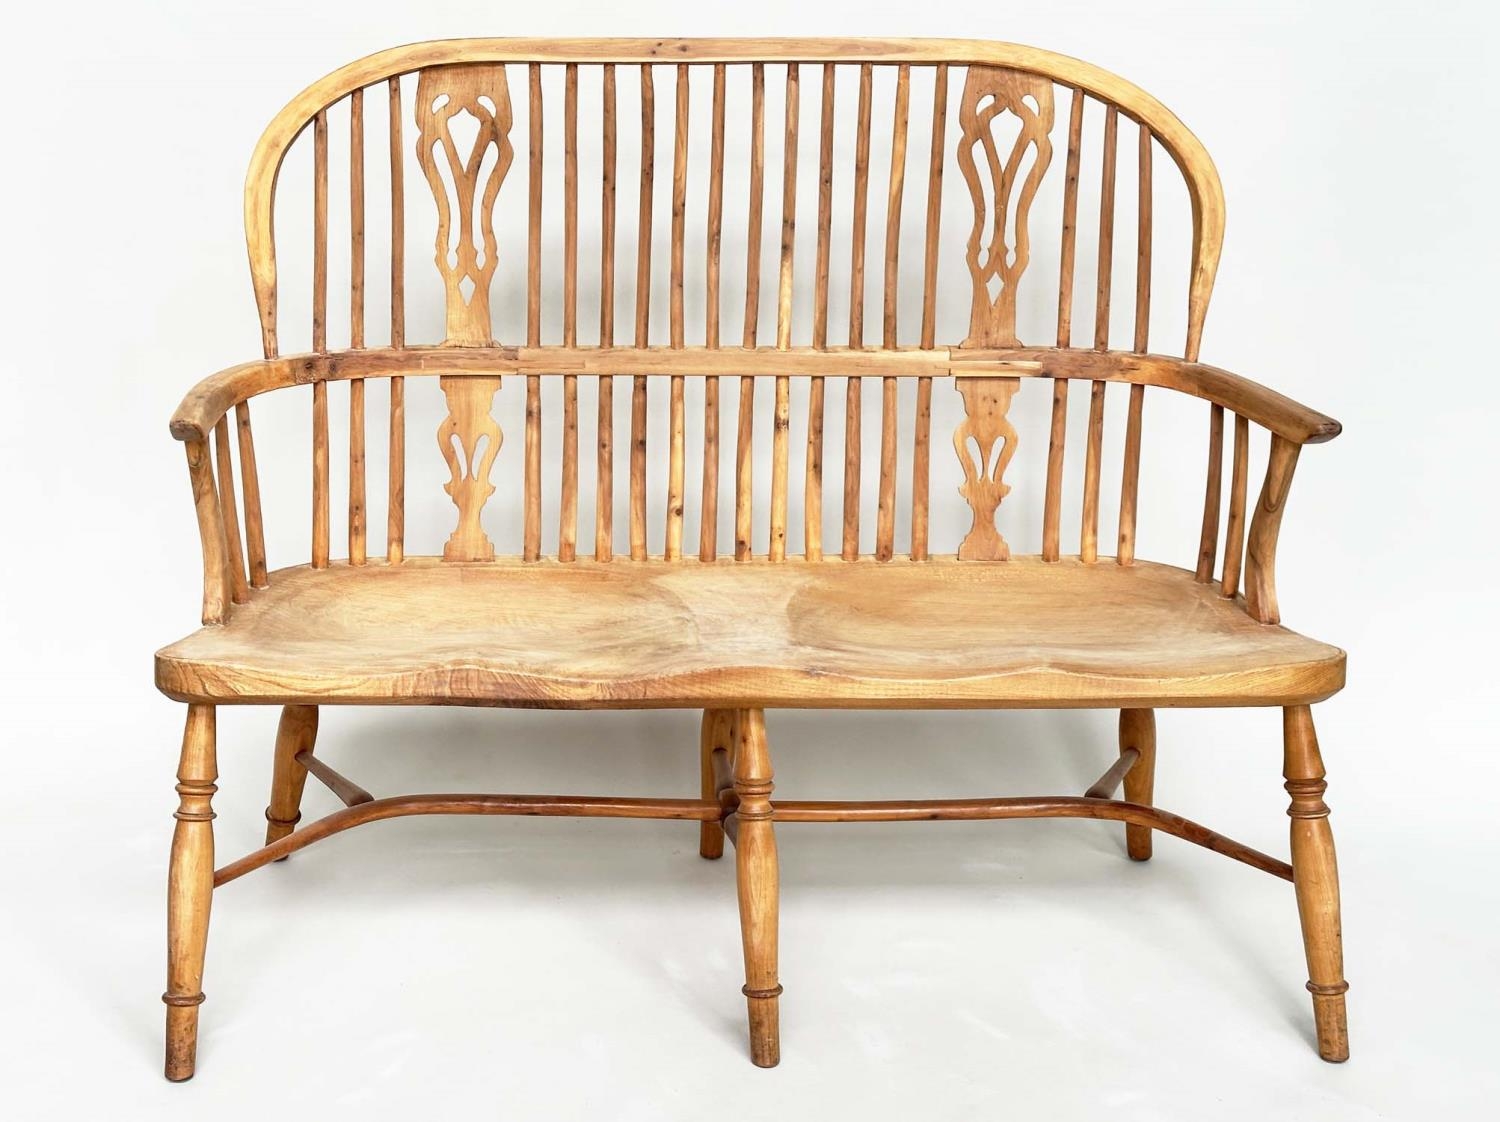 HALL SEAT, antique style English yewwood and elm, with twin pierced splat hoop back and carved